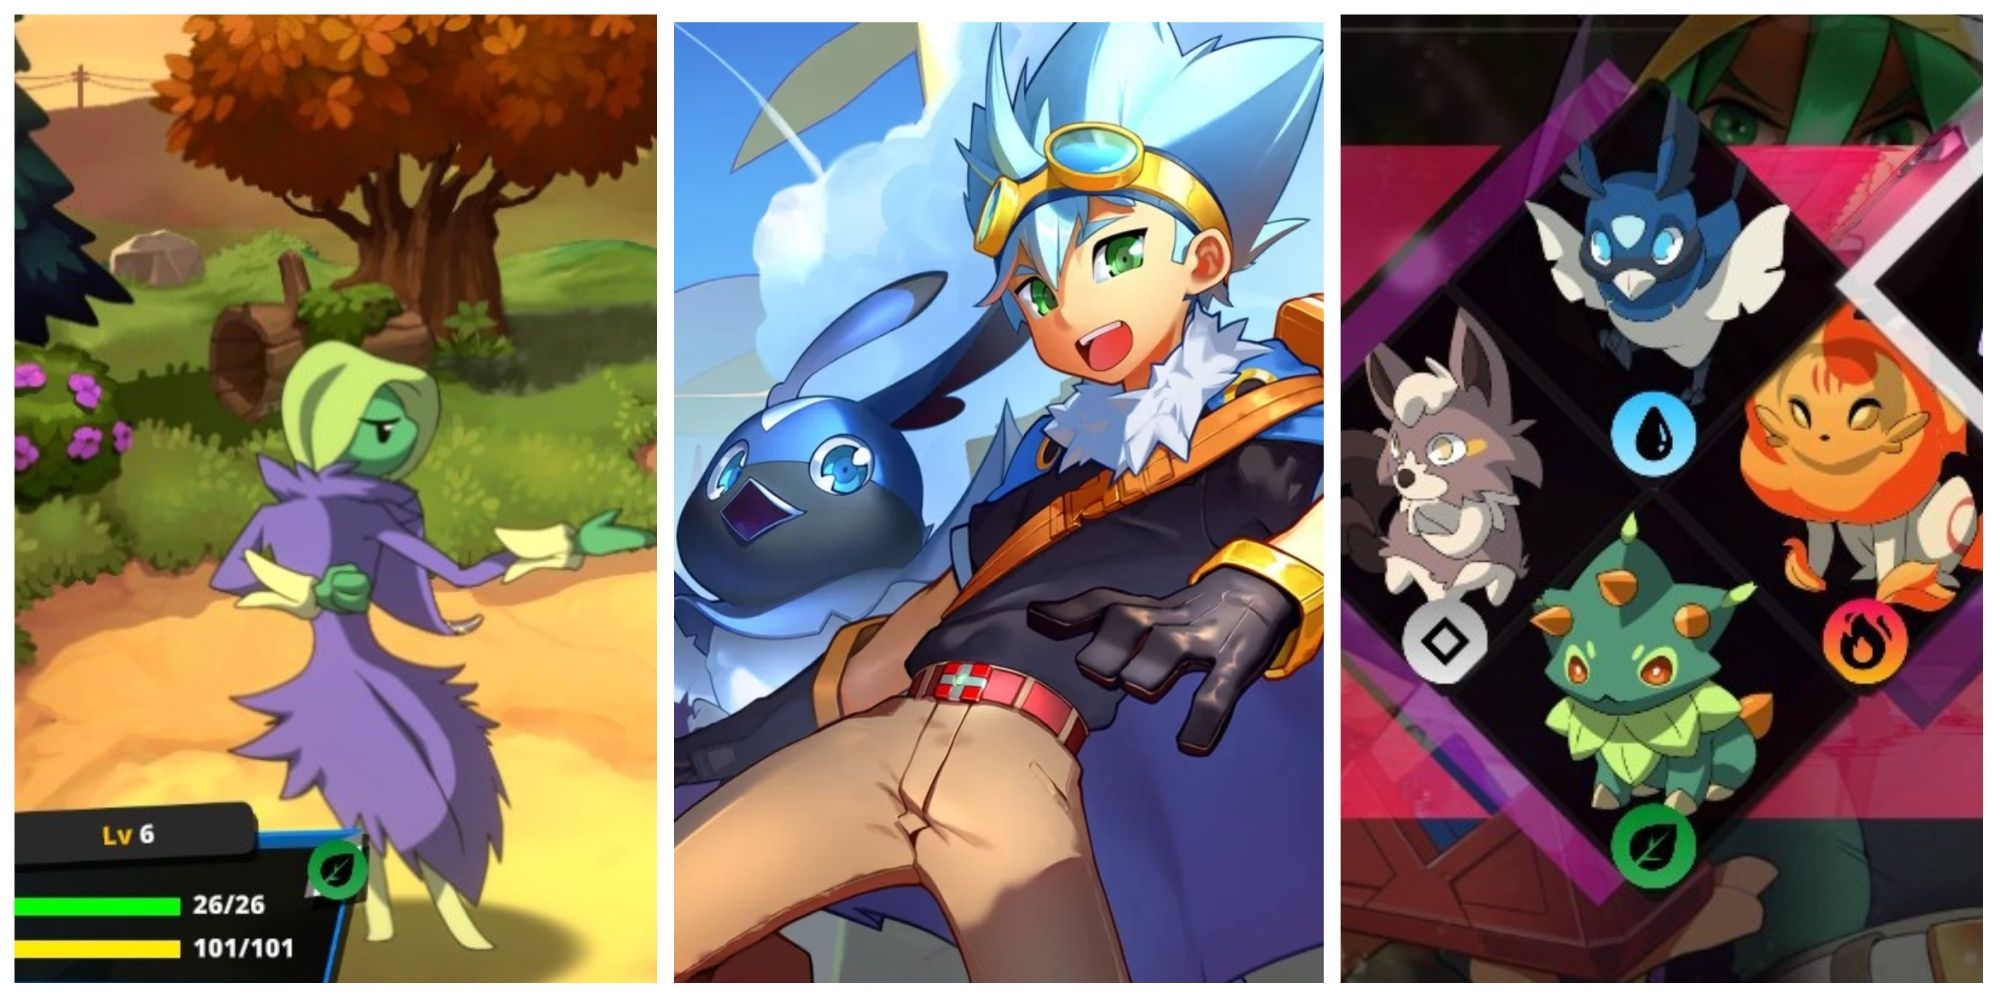 Nexomon Extinction collage of Singletti, the main character with a Noki, and four of the starter options